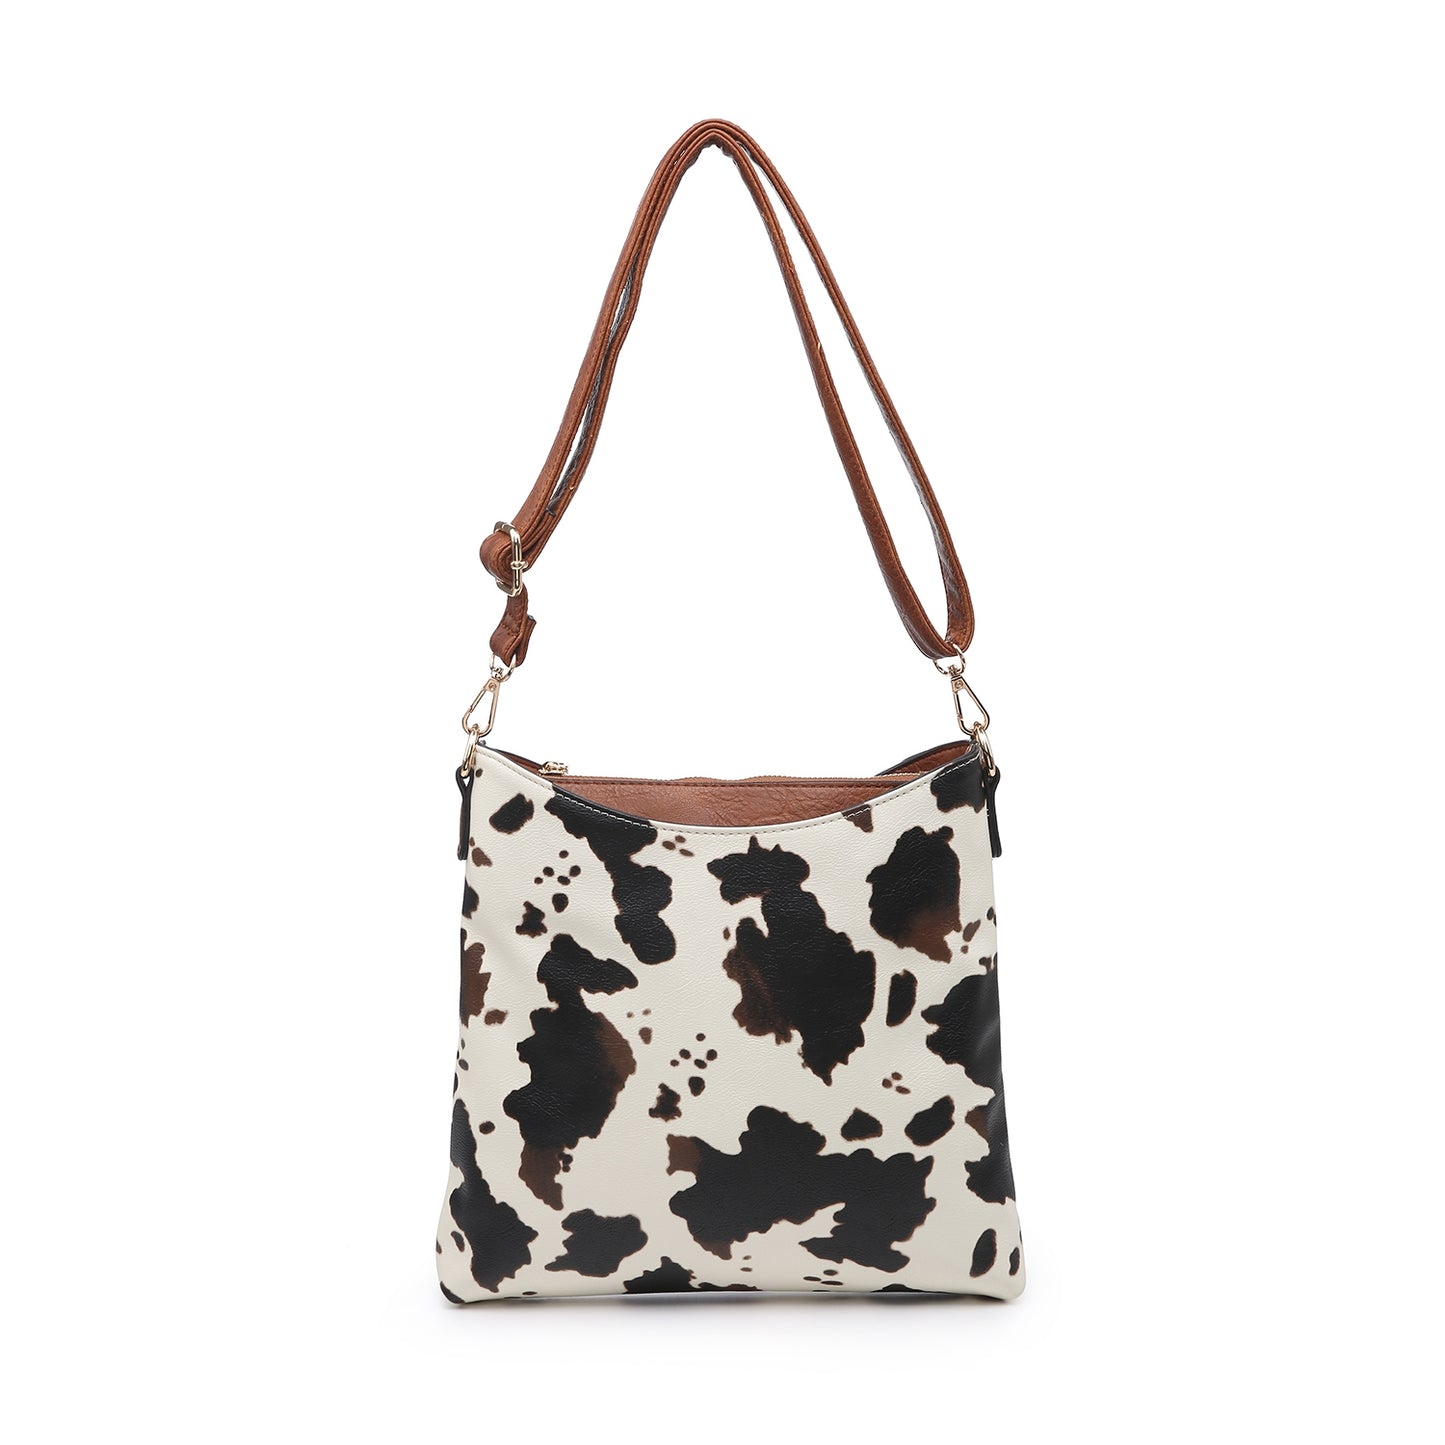 The Lanie 3 Compartment Crossbody Bag - Cow